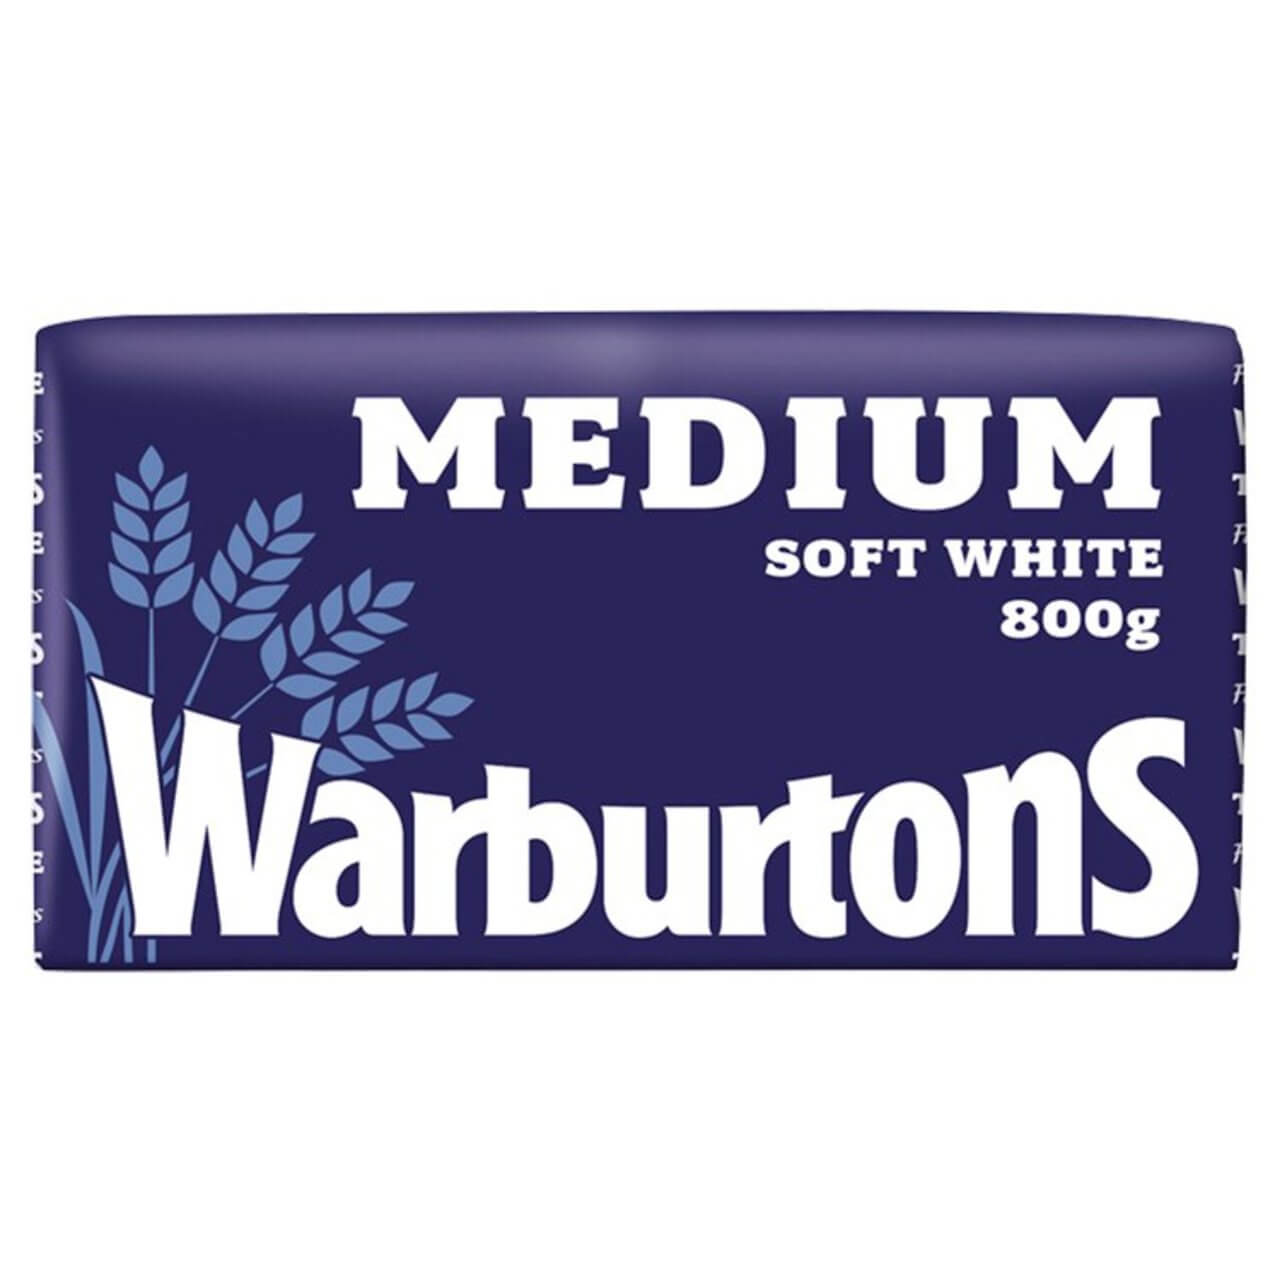 A glimpse of diverse products by Warburtons, supporting the UK economy on YouK.